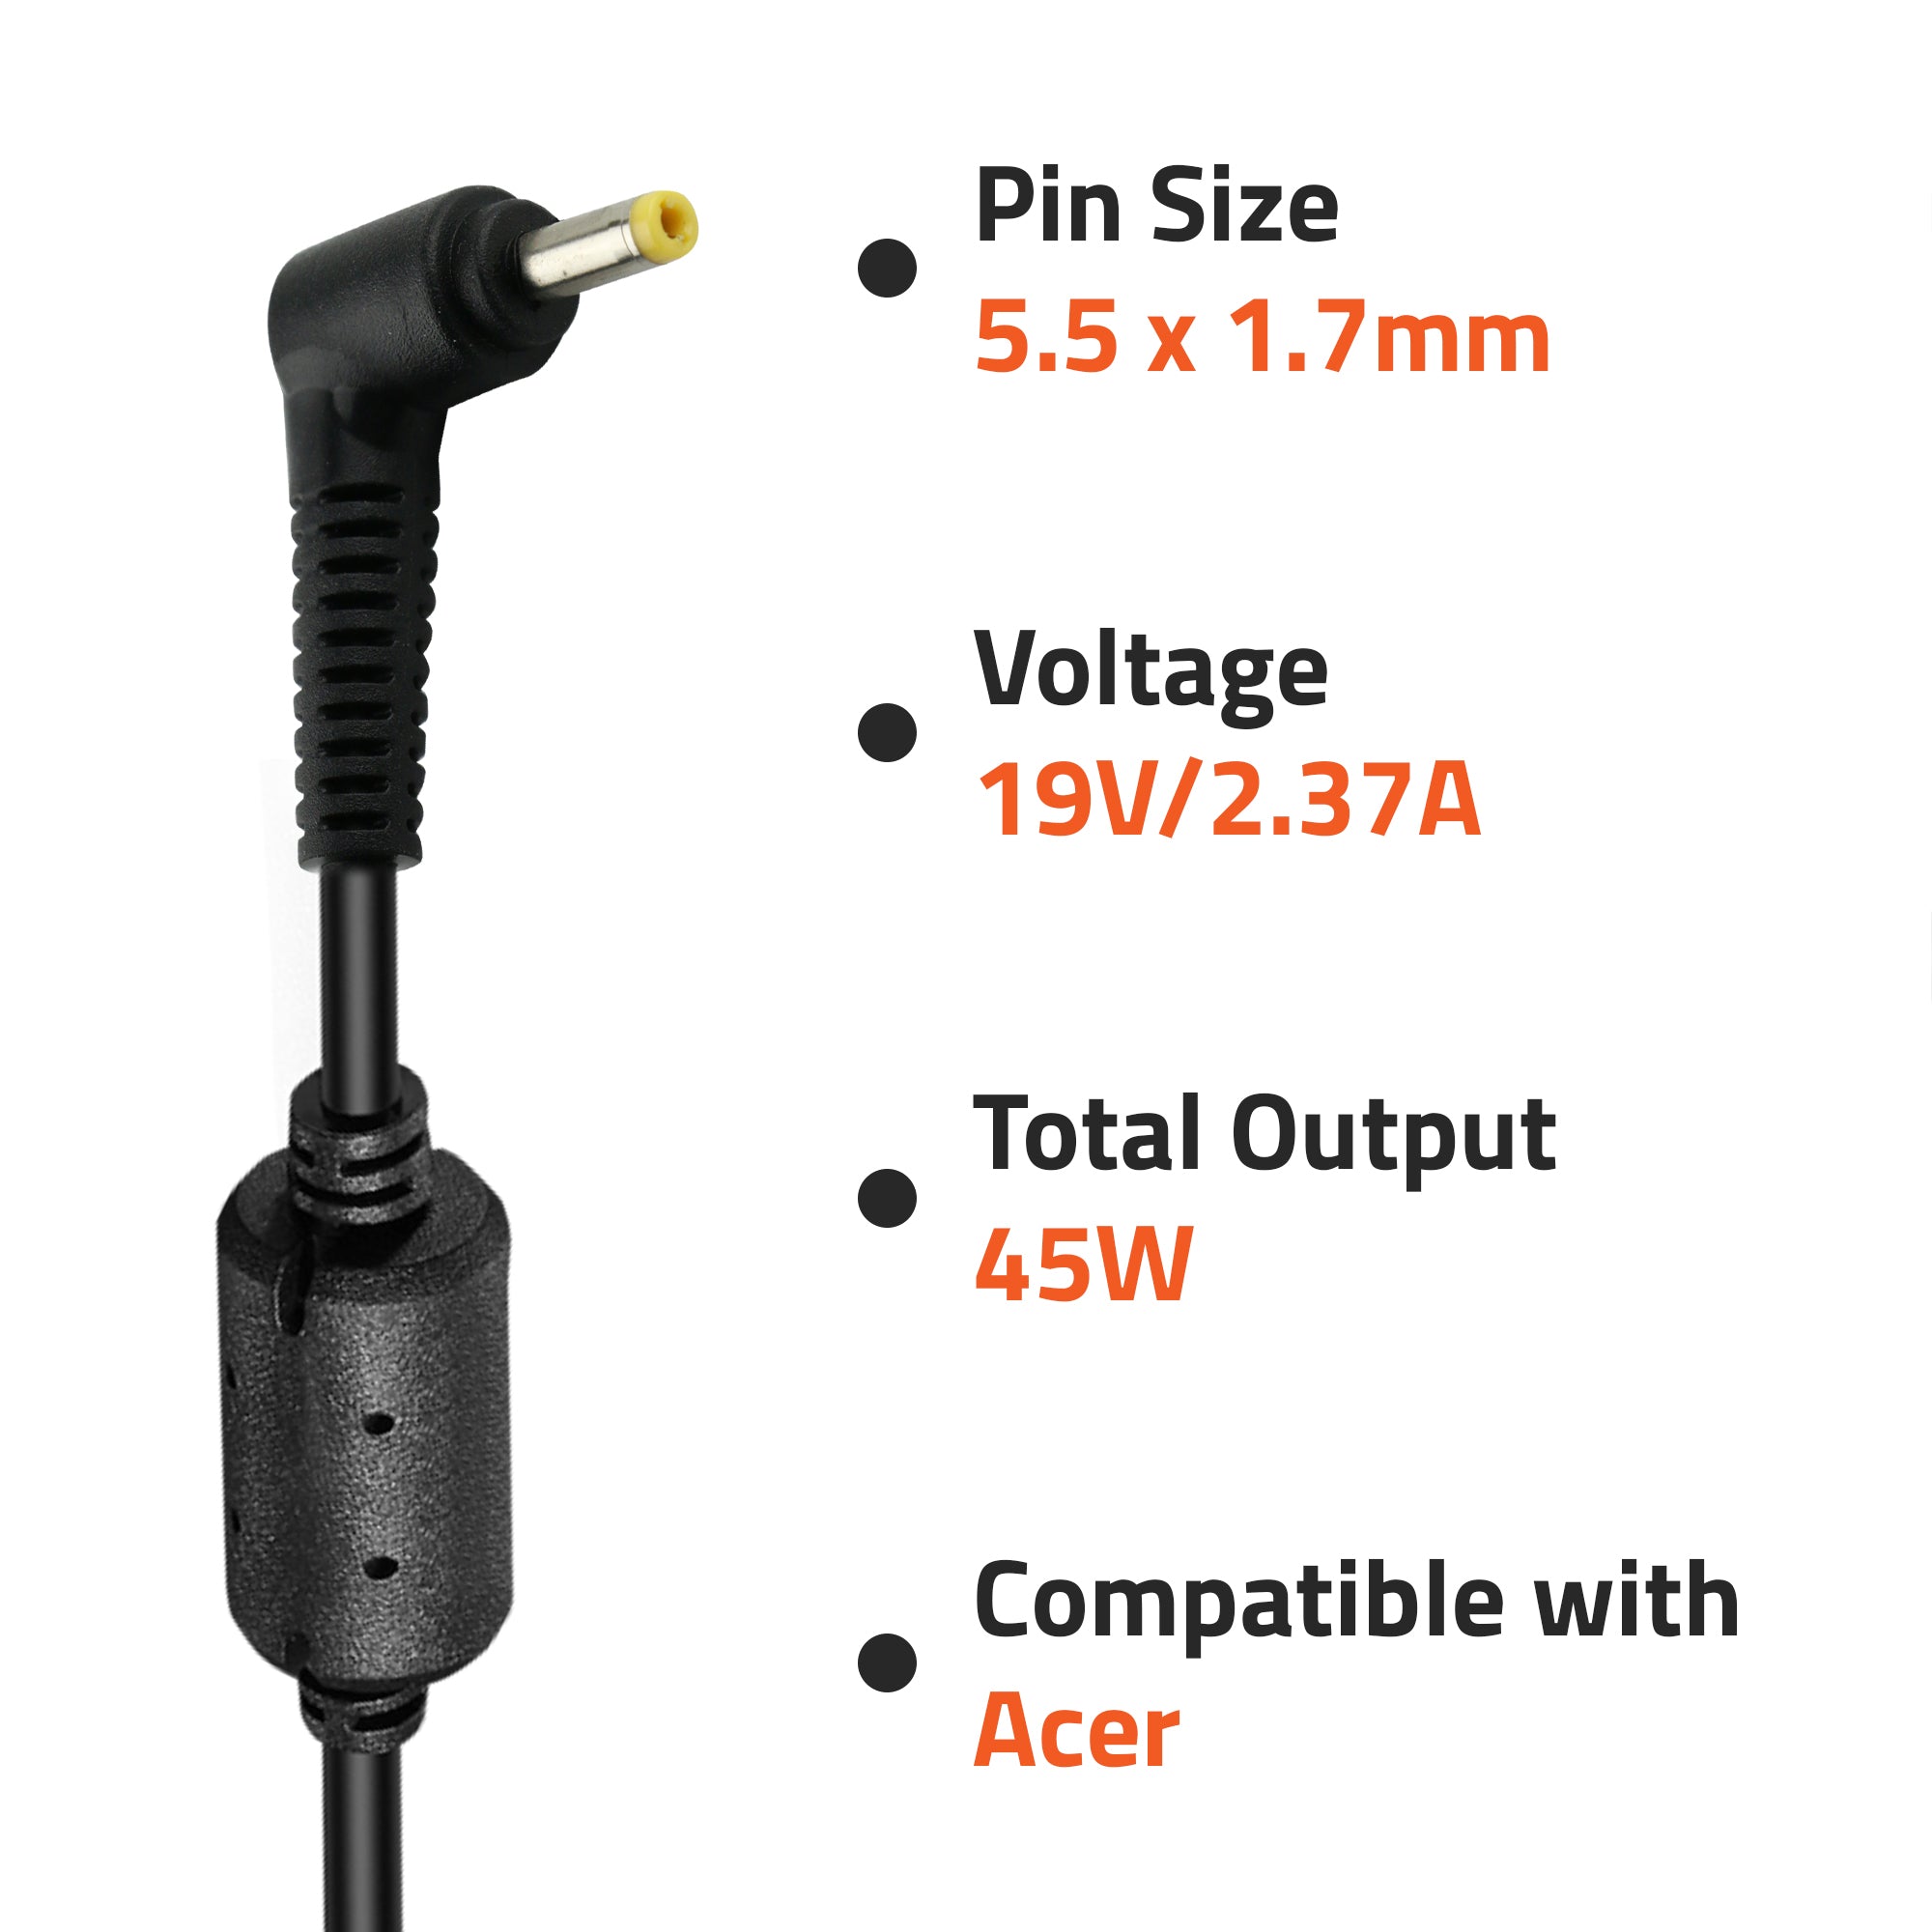 A0405 45Watt Laptop Adapter Compatible with Acer Laptops (19V/2.37A ,Pin: 5.5 x 1.7mm)